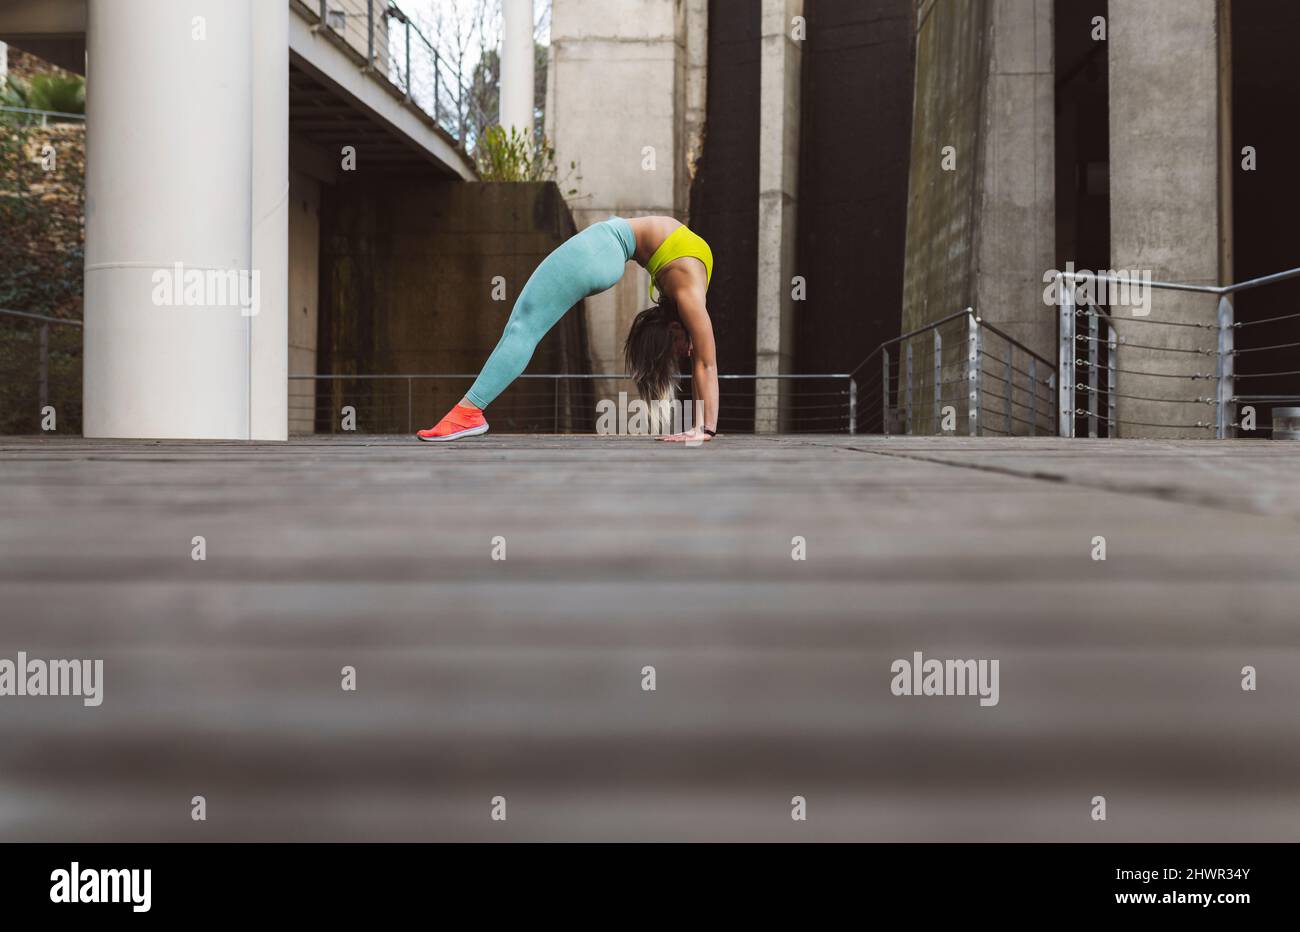 Young athlete bending over backwards on footpath in park Stock Photo